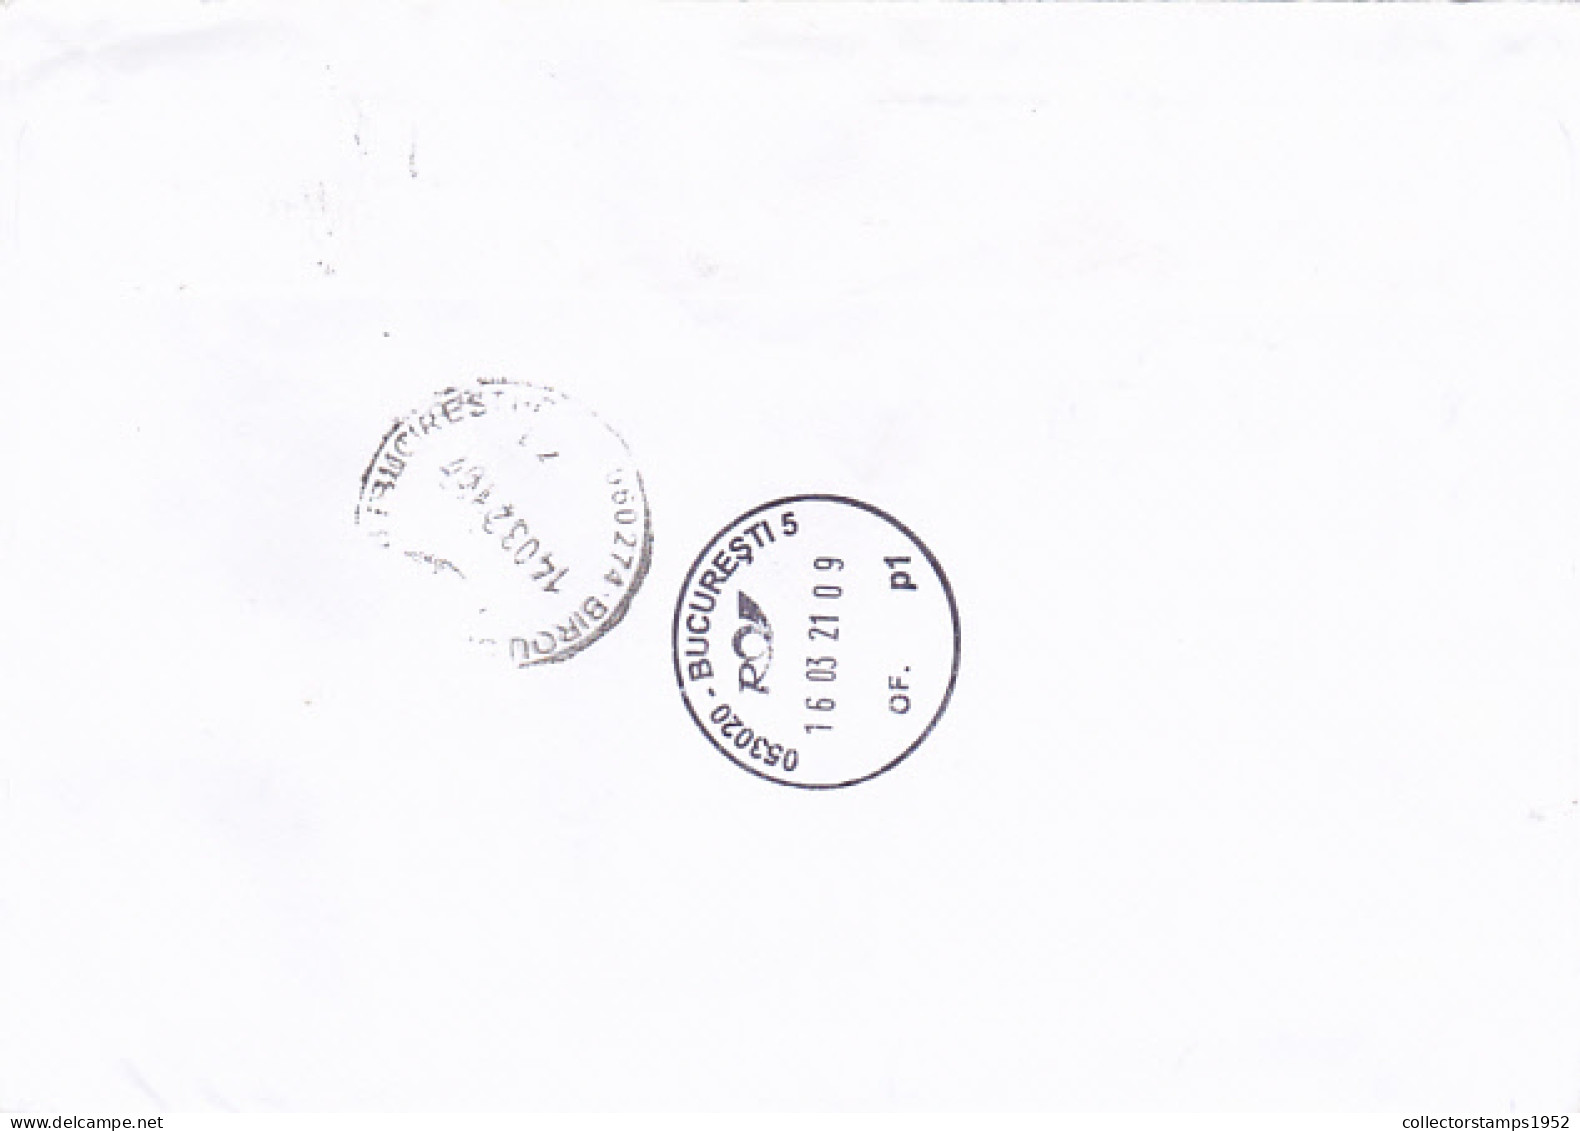 FAIRY TALES, FINE STAMPS ON REGISTERED COVER, 2021, RUSSIA - Lettres & Documents